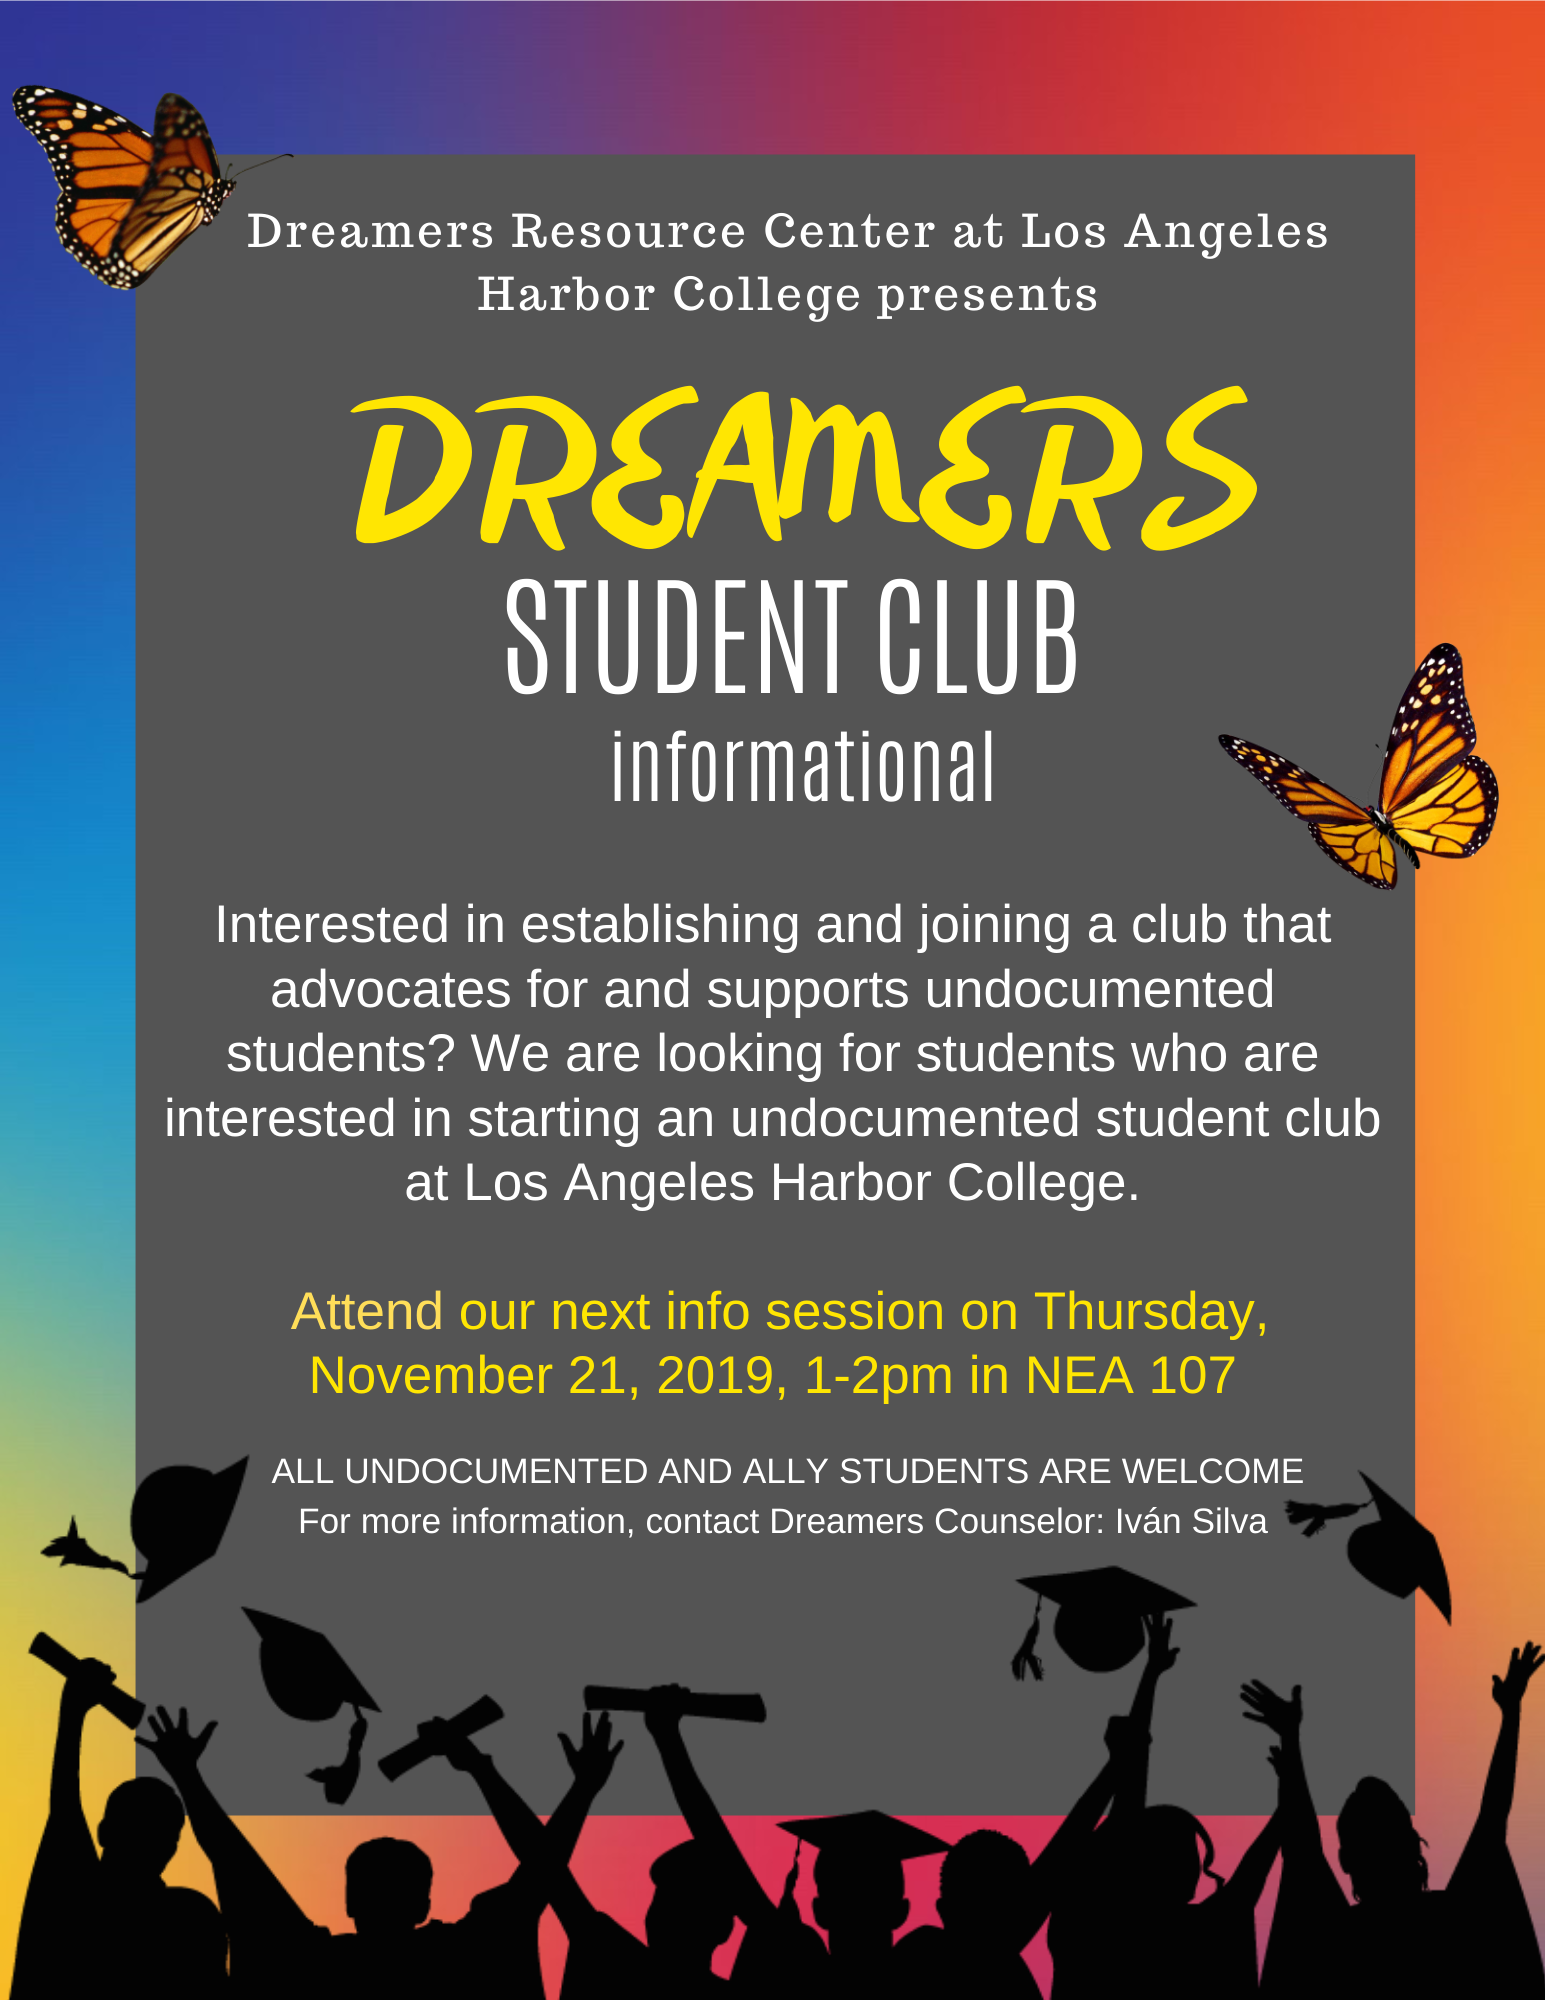 Dreamers Student Club Promotional Flayer 